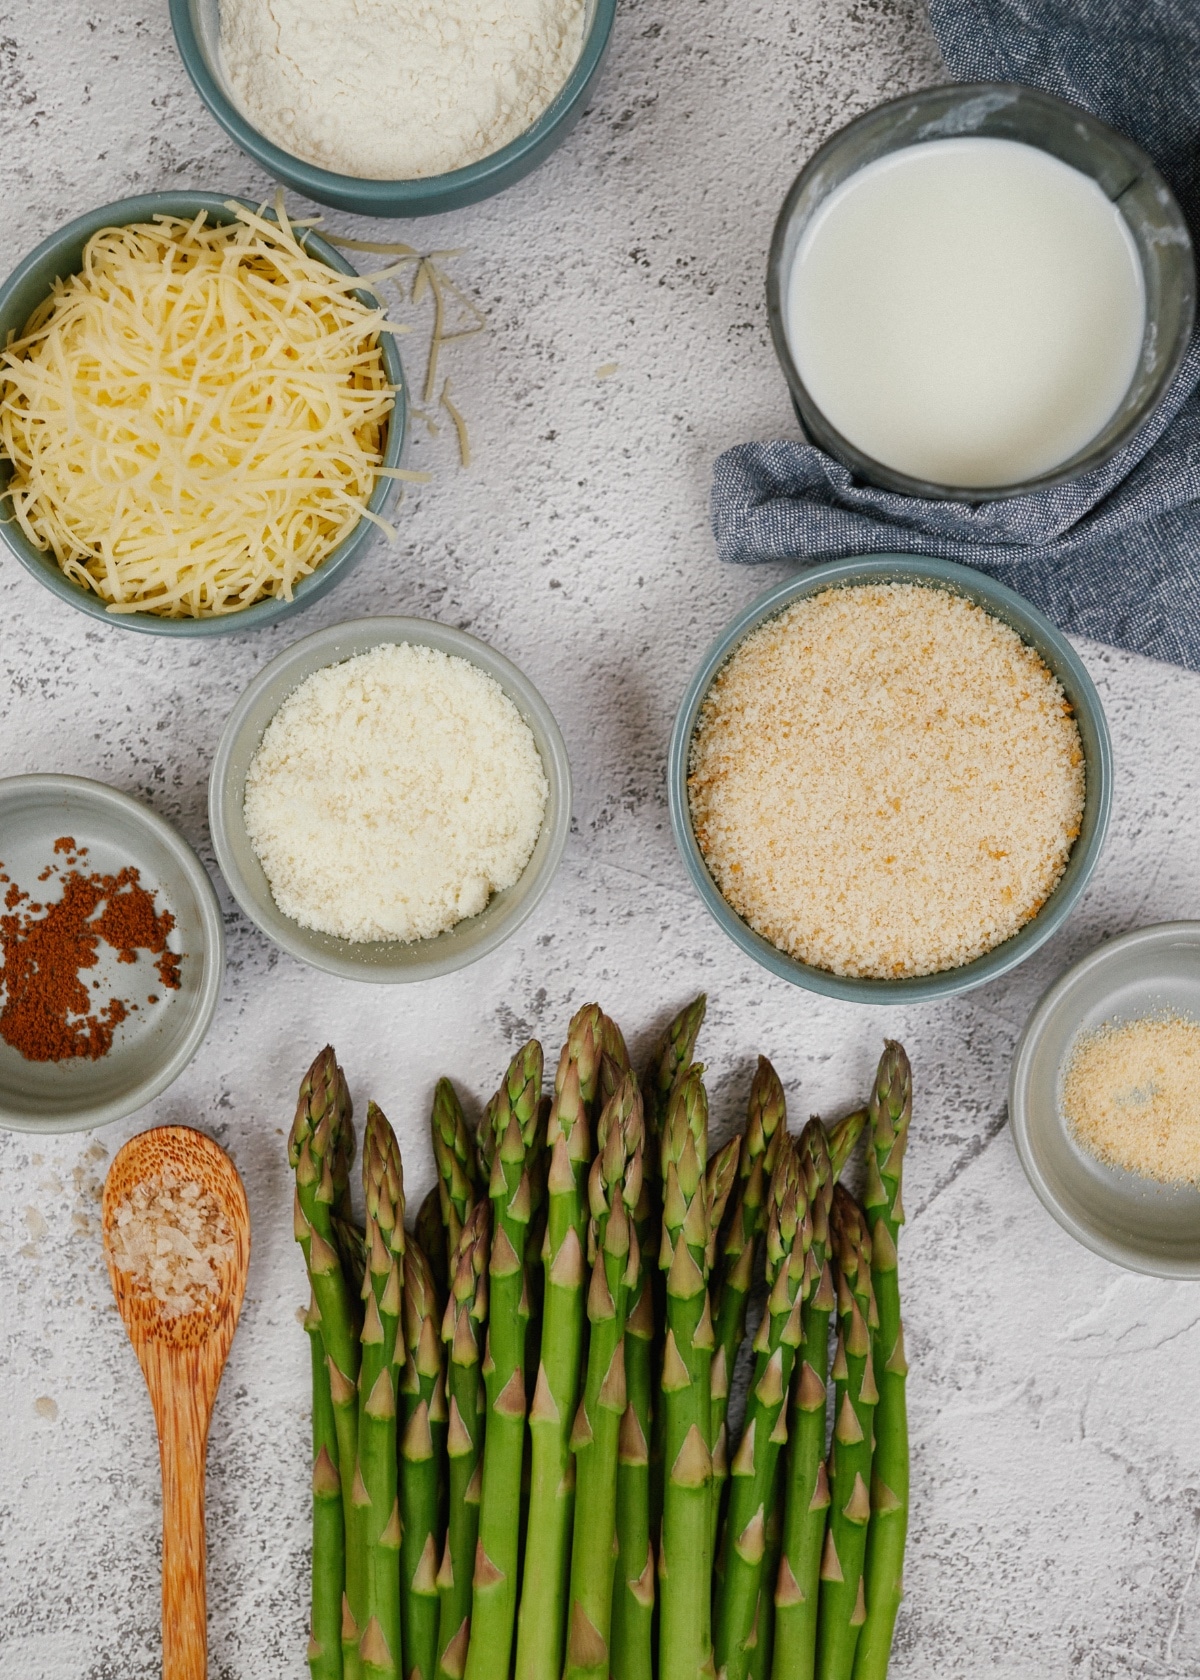 ingredients for asparagus casserole in small bowls